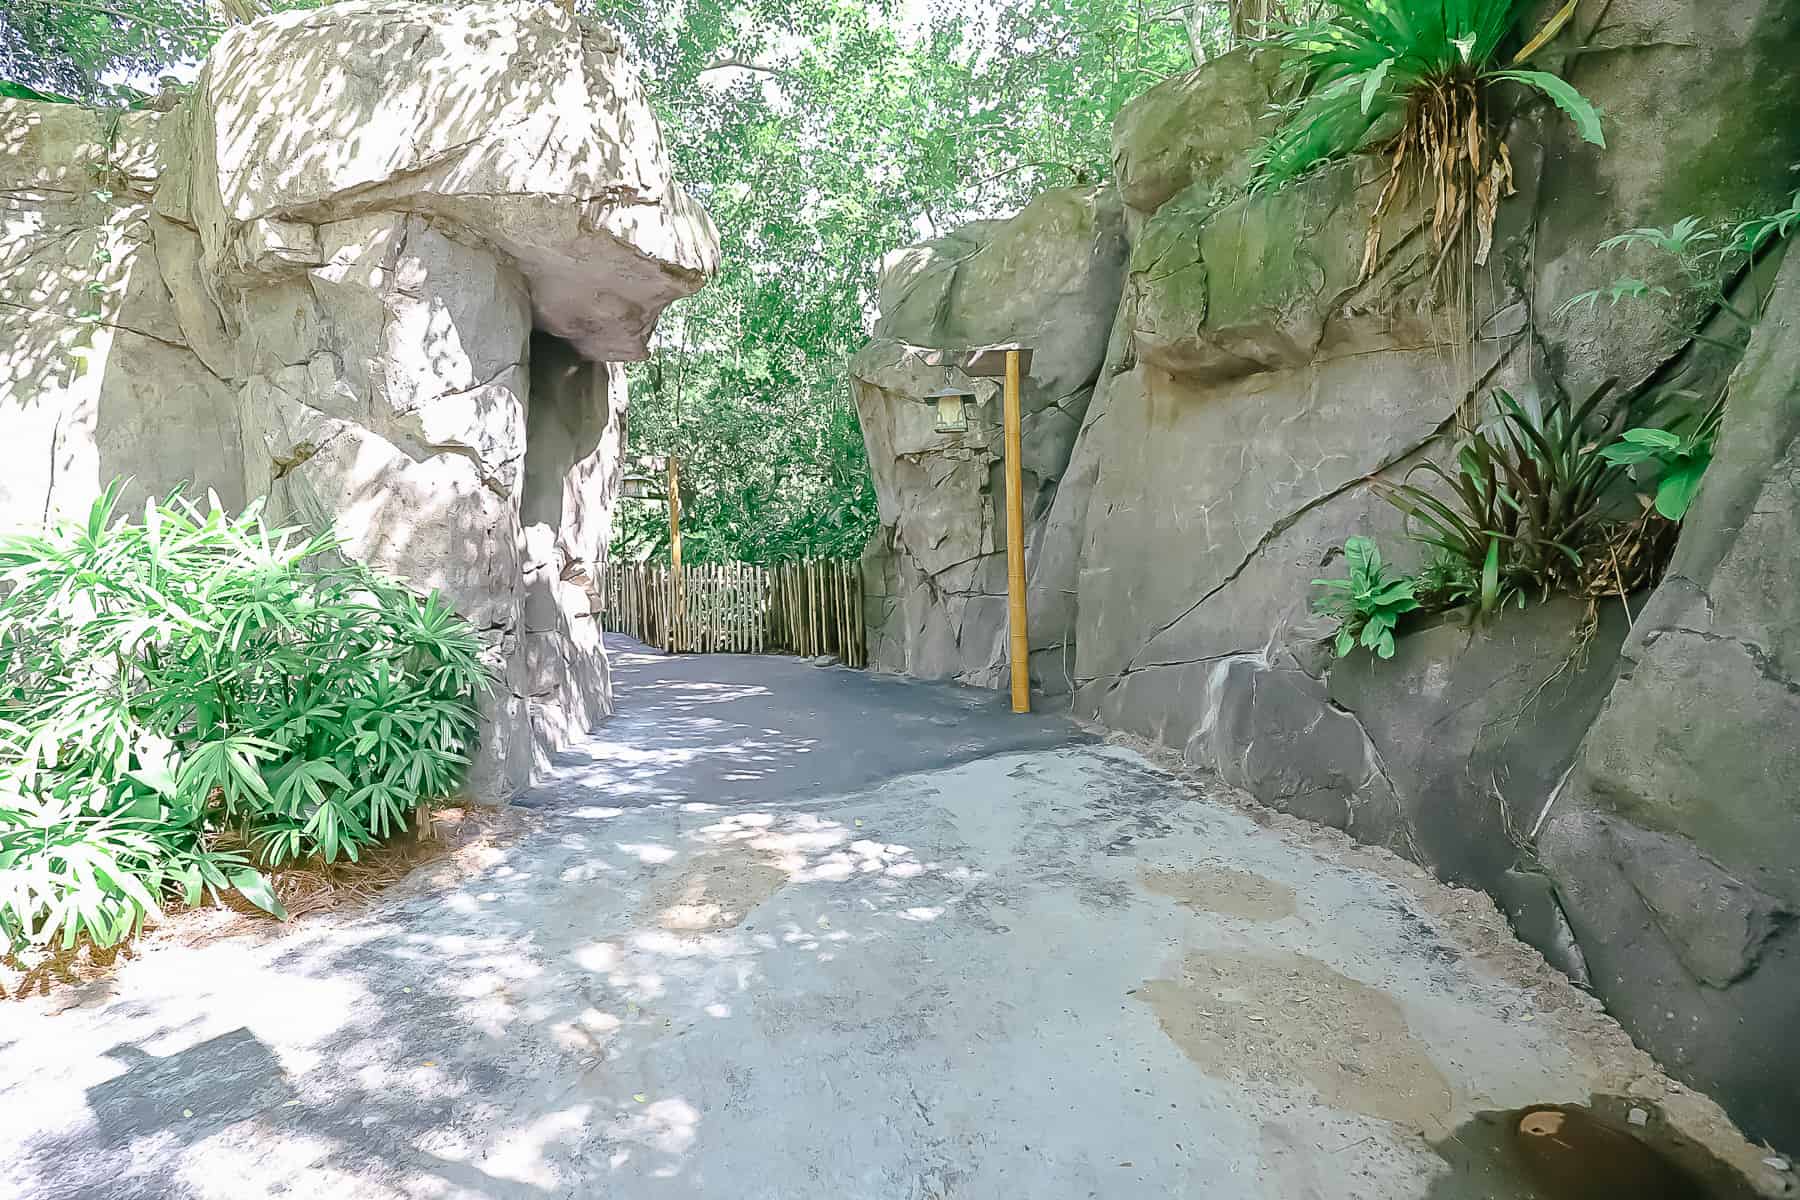 location for Pocahontas meet-and-greet 